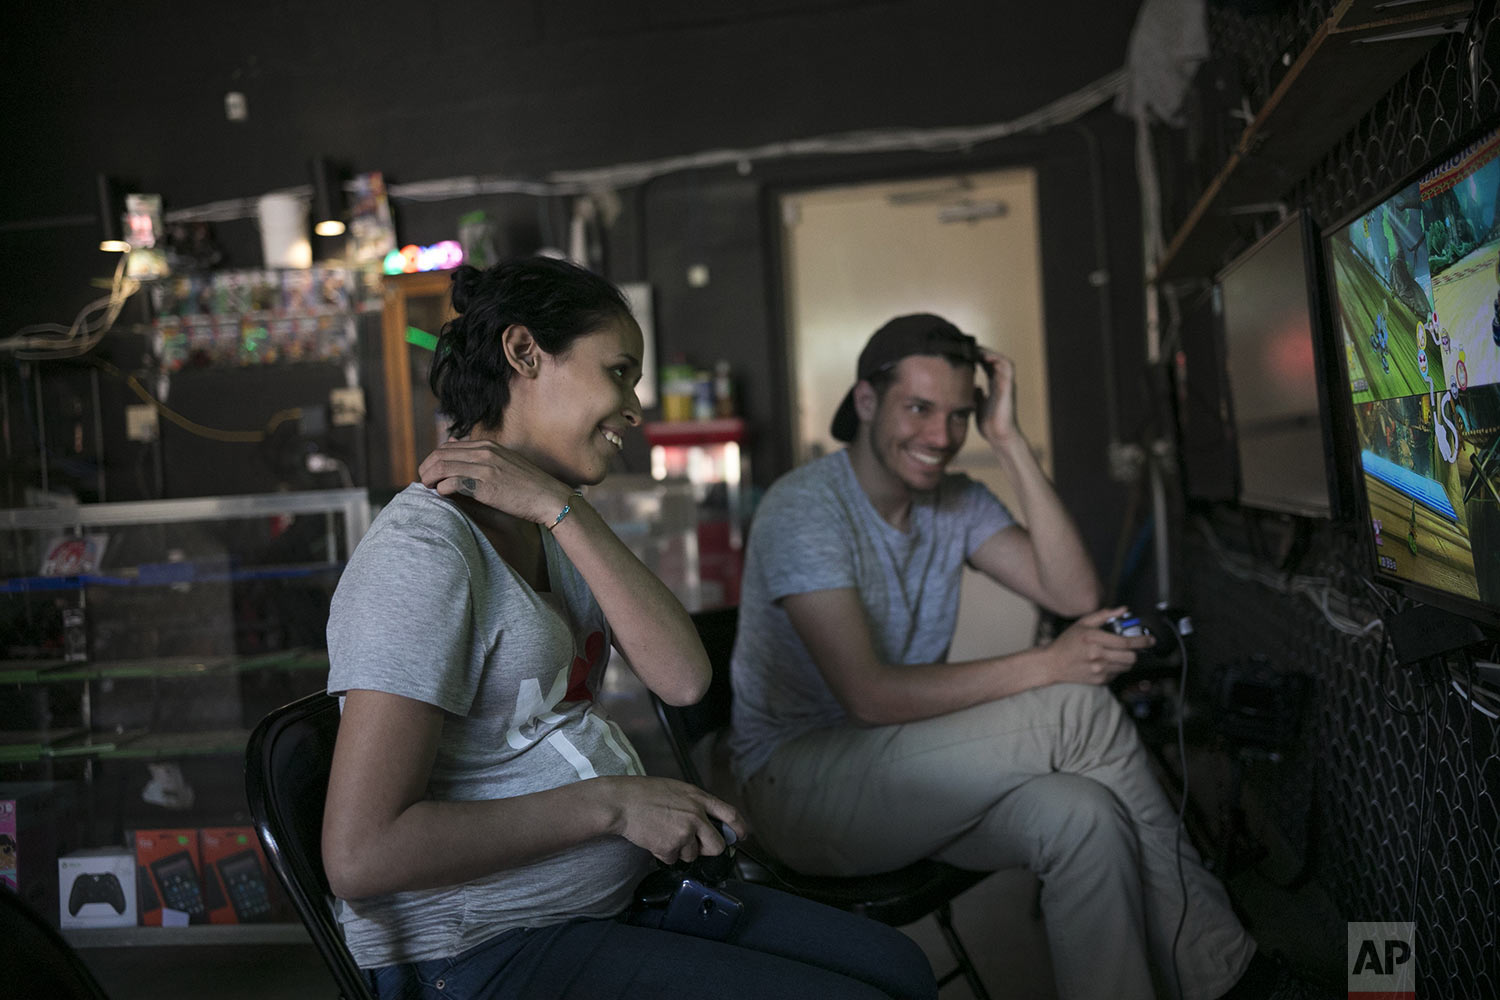  In this May 23, 2019 photo, pregnant teen migrant, Milagro de Jesus Henriquez Ayala plays video games with her friend, Ivan Duran Avila, at a small shopping plaza in Tijuana, Mexico. (AP Photo/Emilio Espejel) 